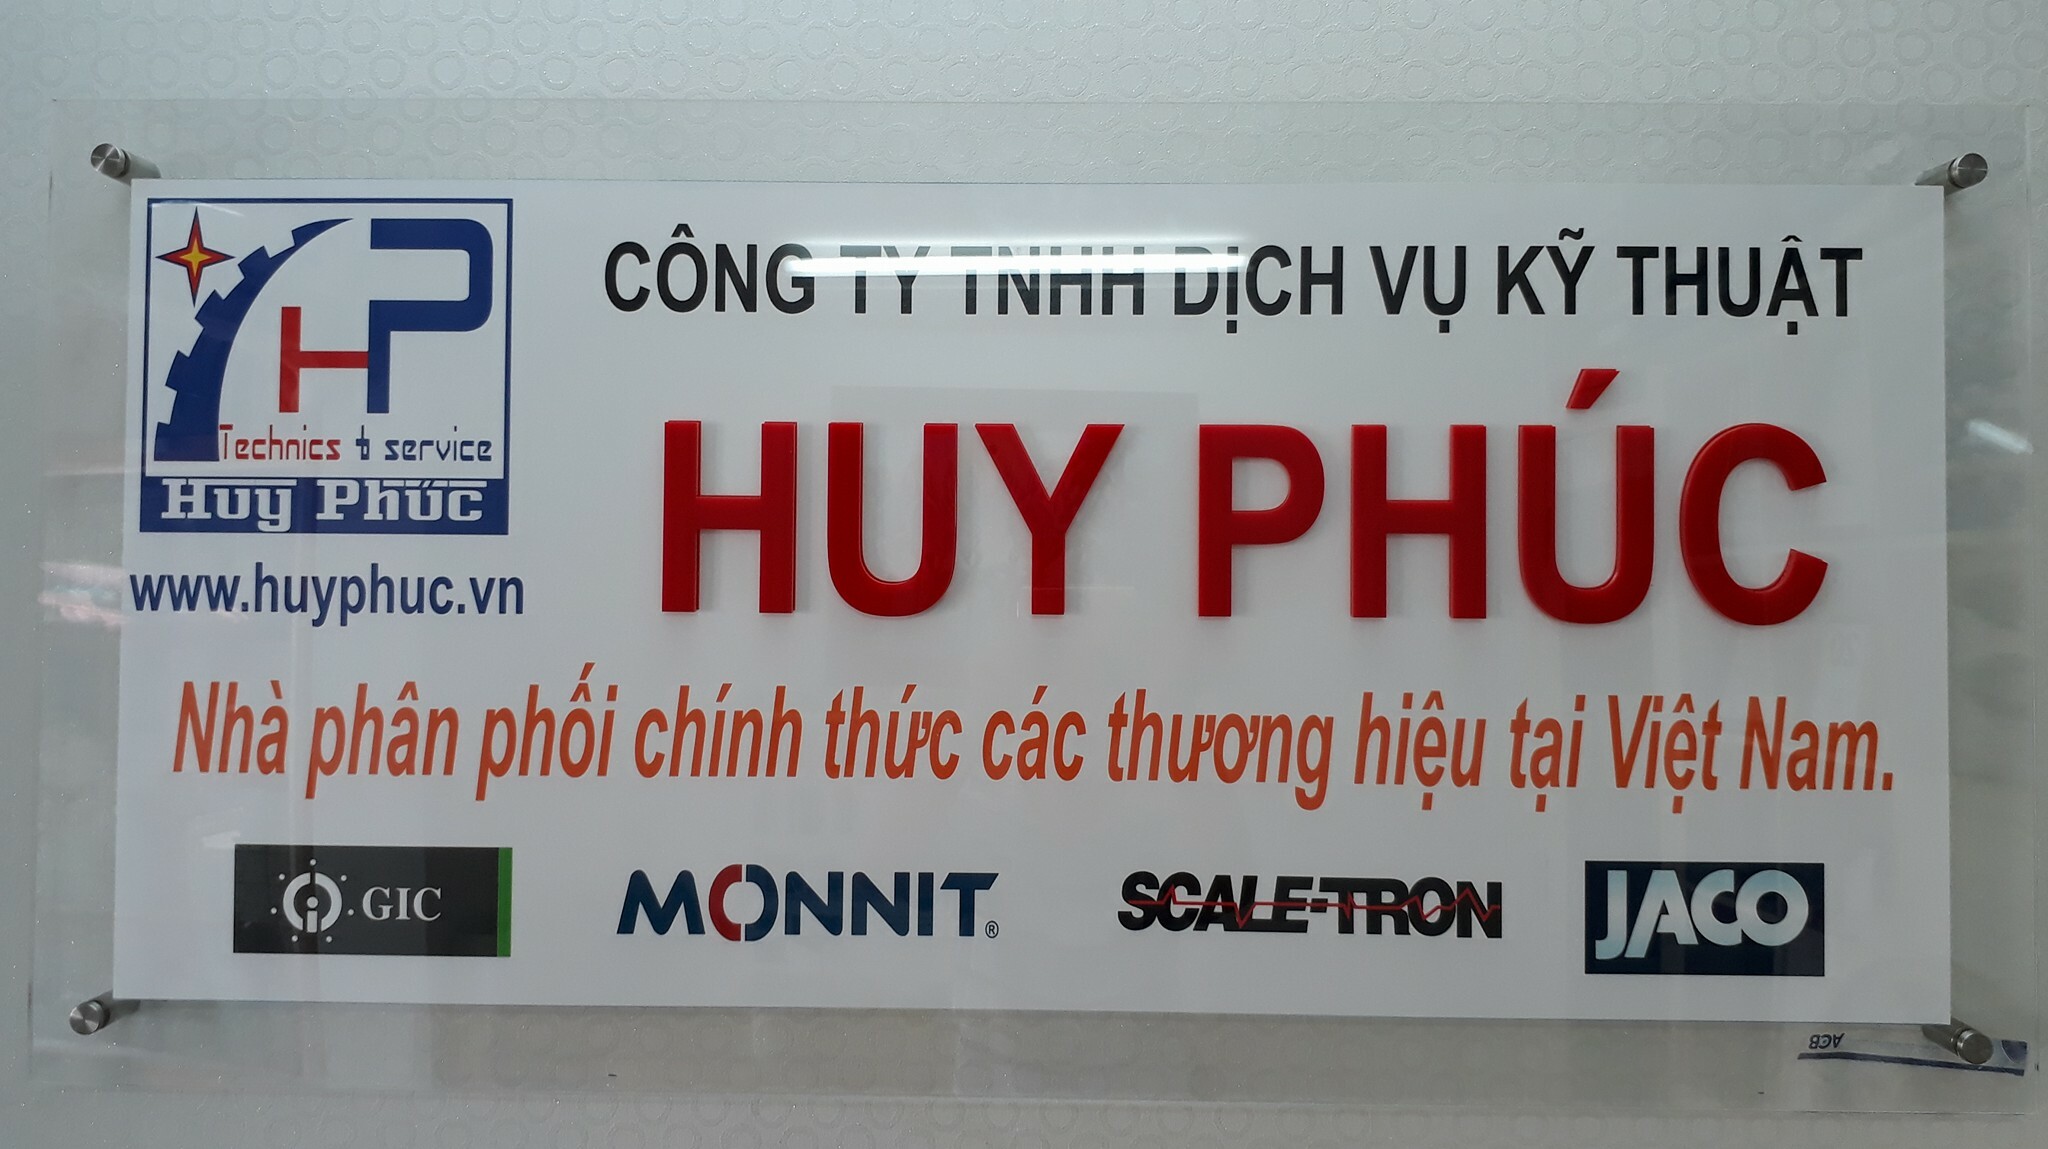 Cover image for HUY PHÚC